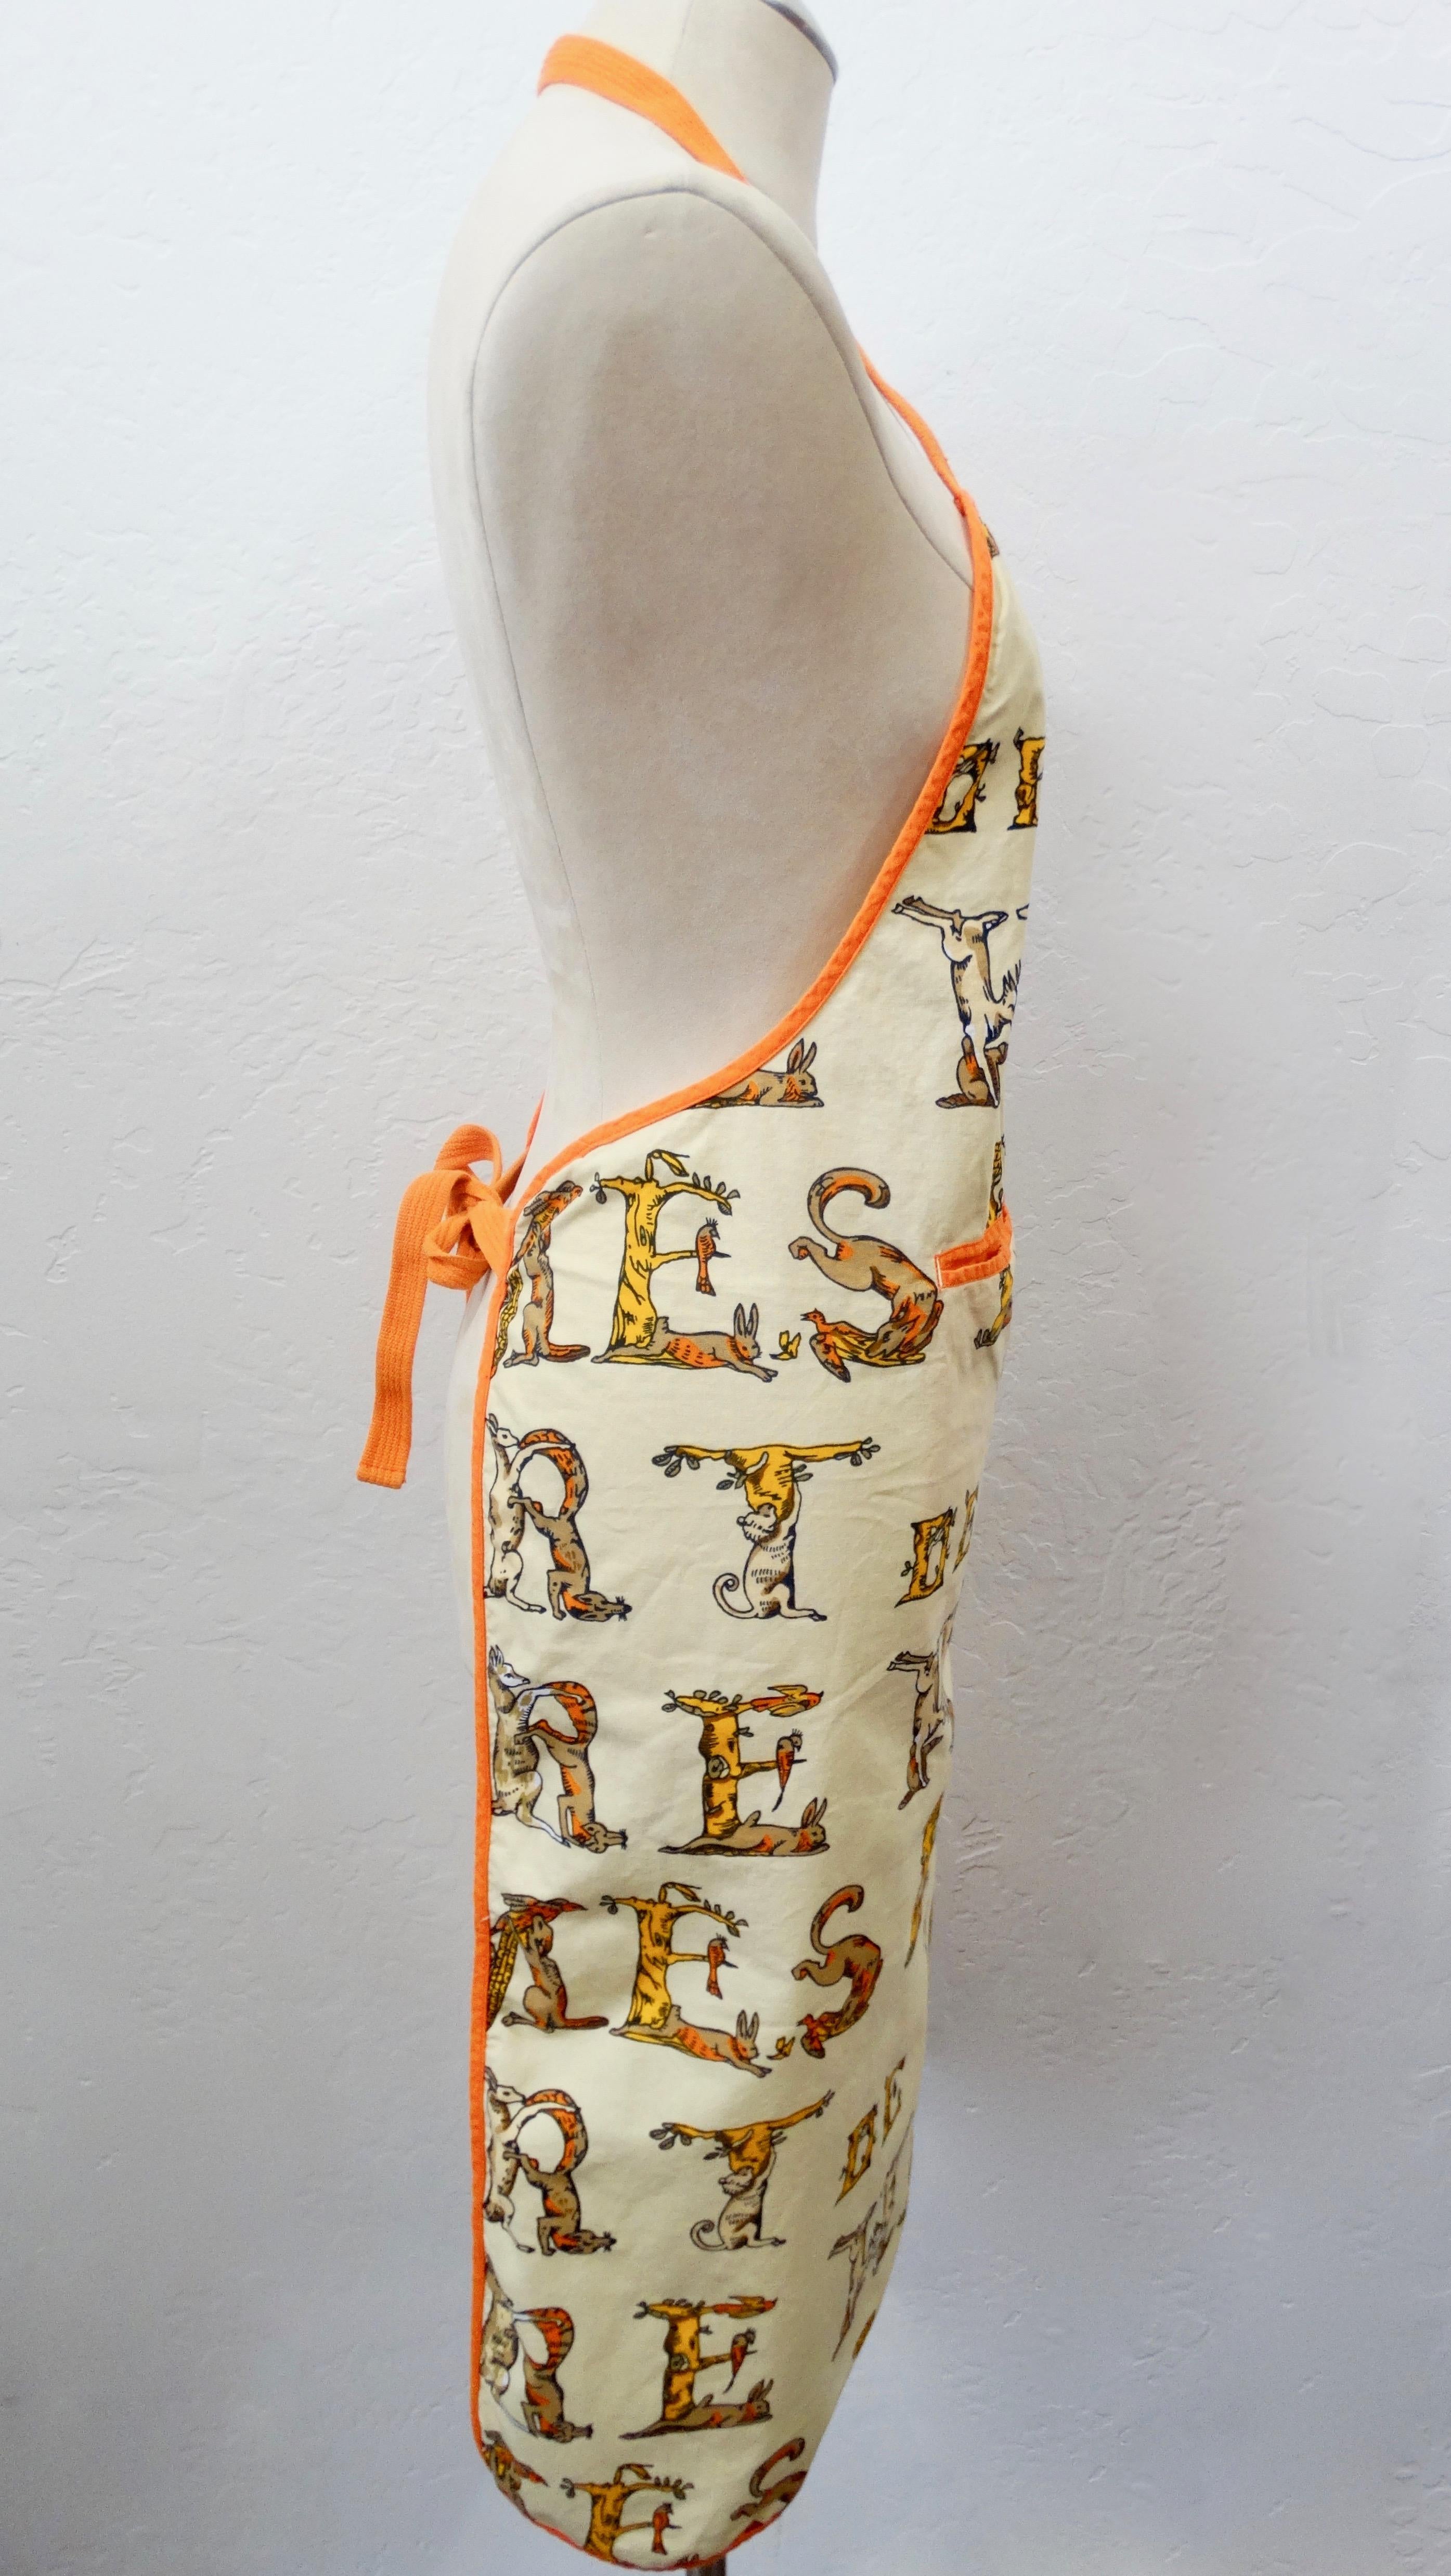 Keep yourself looking fabulous while you cook with this Hermés apron! Circa 1990s, this decorative apron is made of cotton and features various woodland creatures that are positioned to spell out 